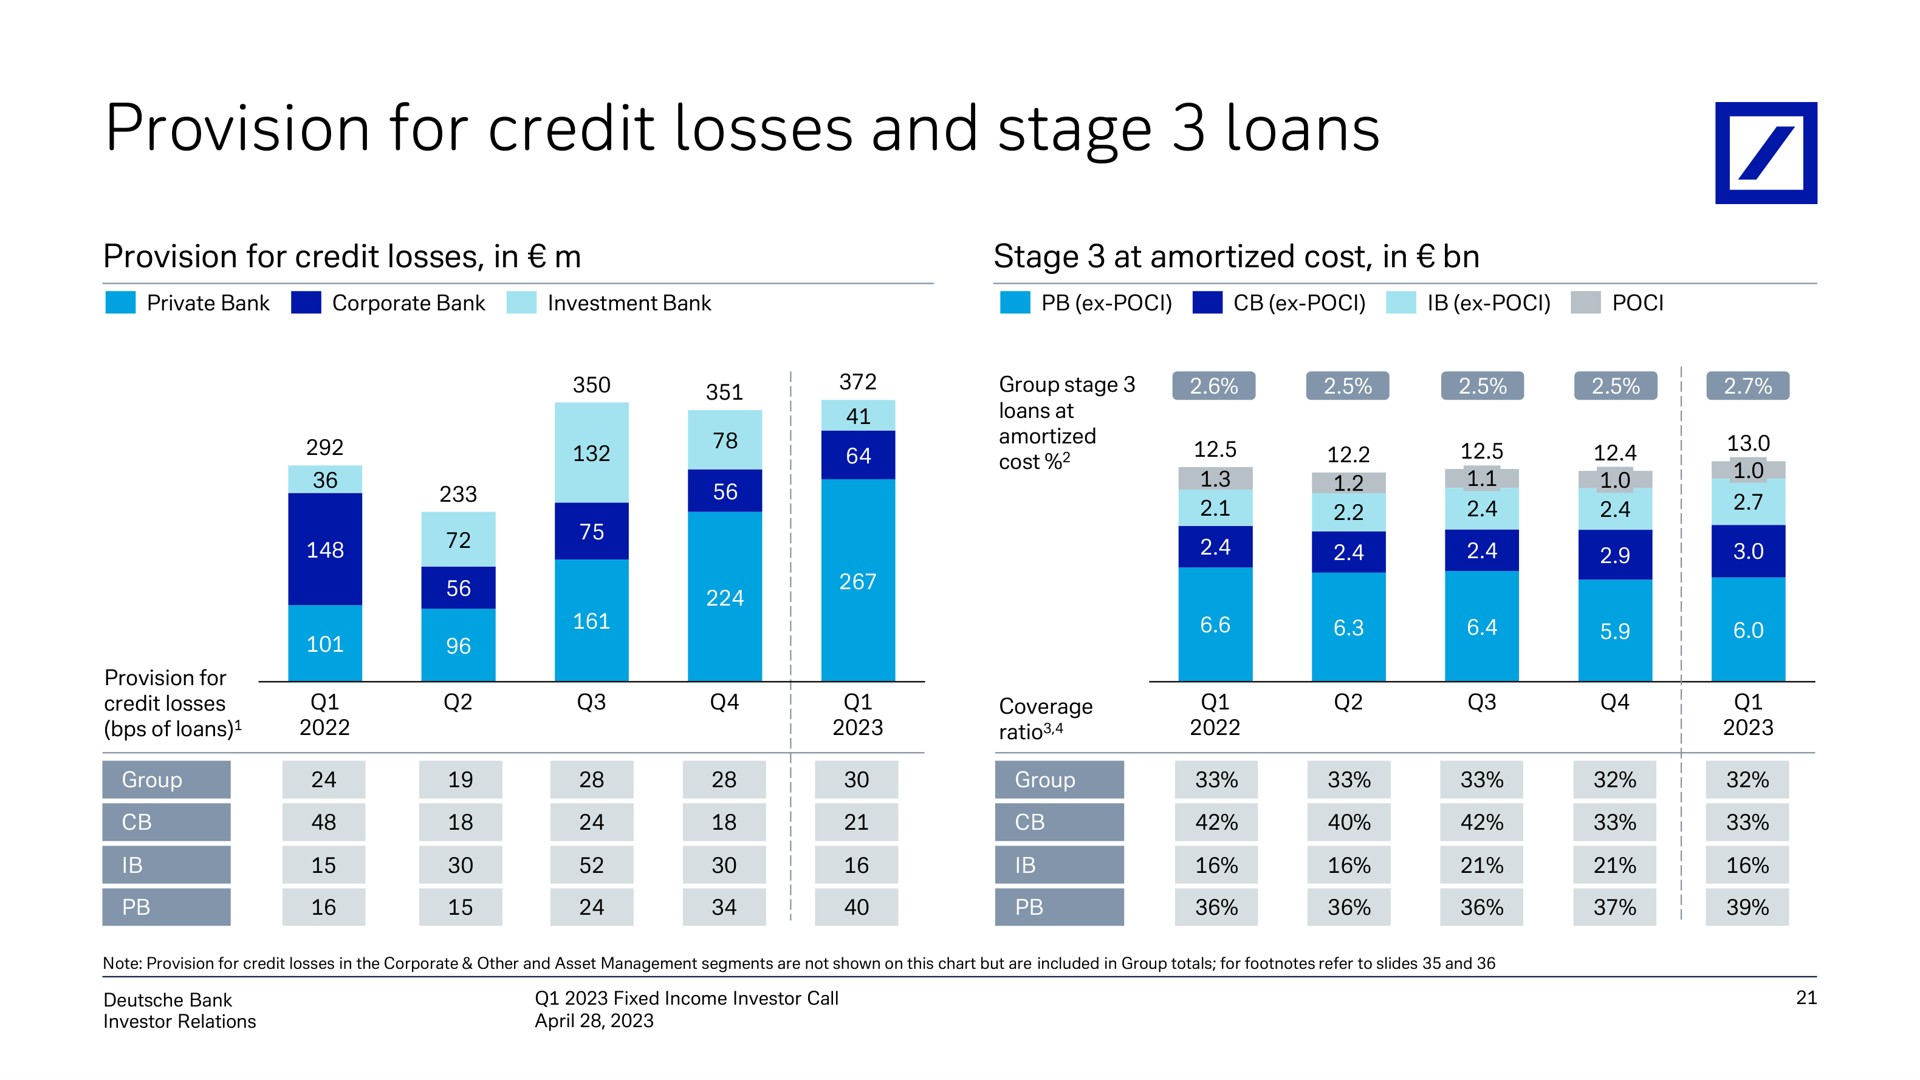 provision for credit losses and stage loans | Deutsche Bank